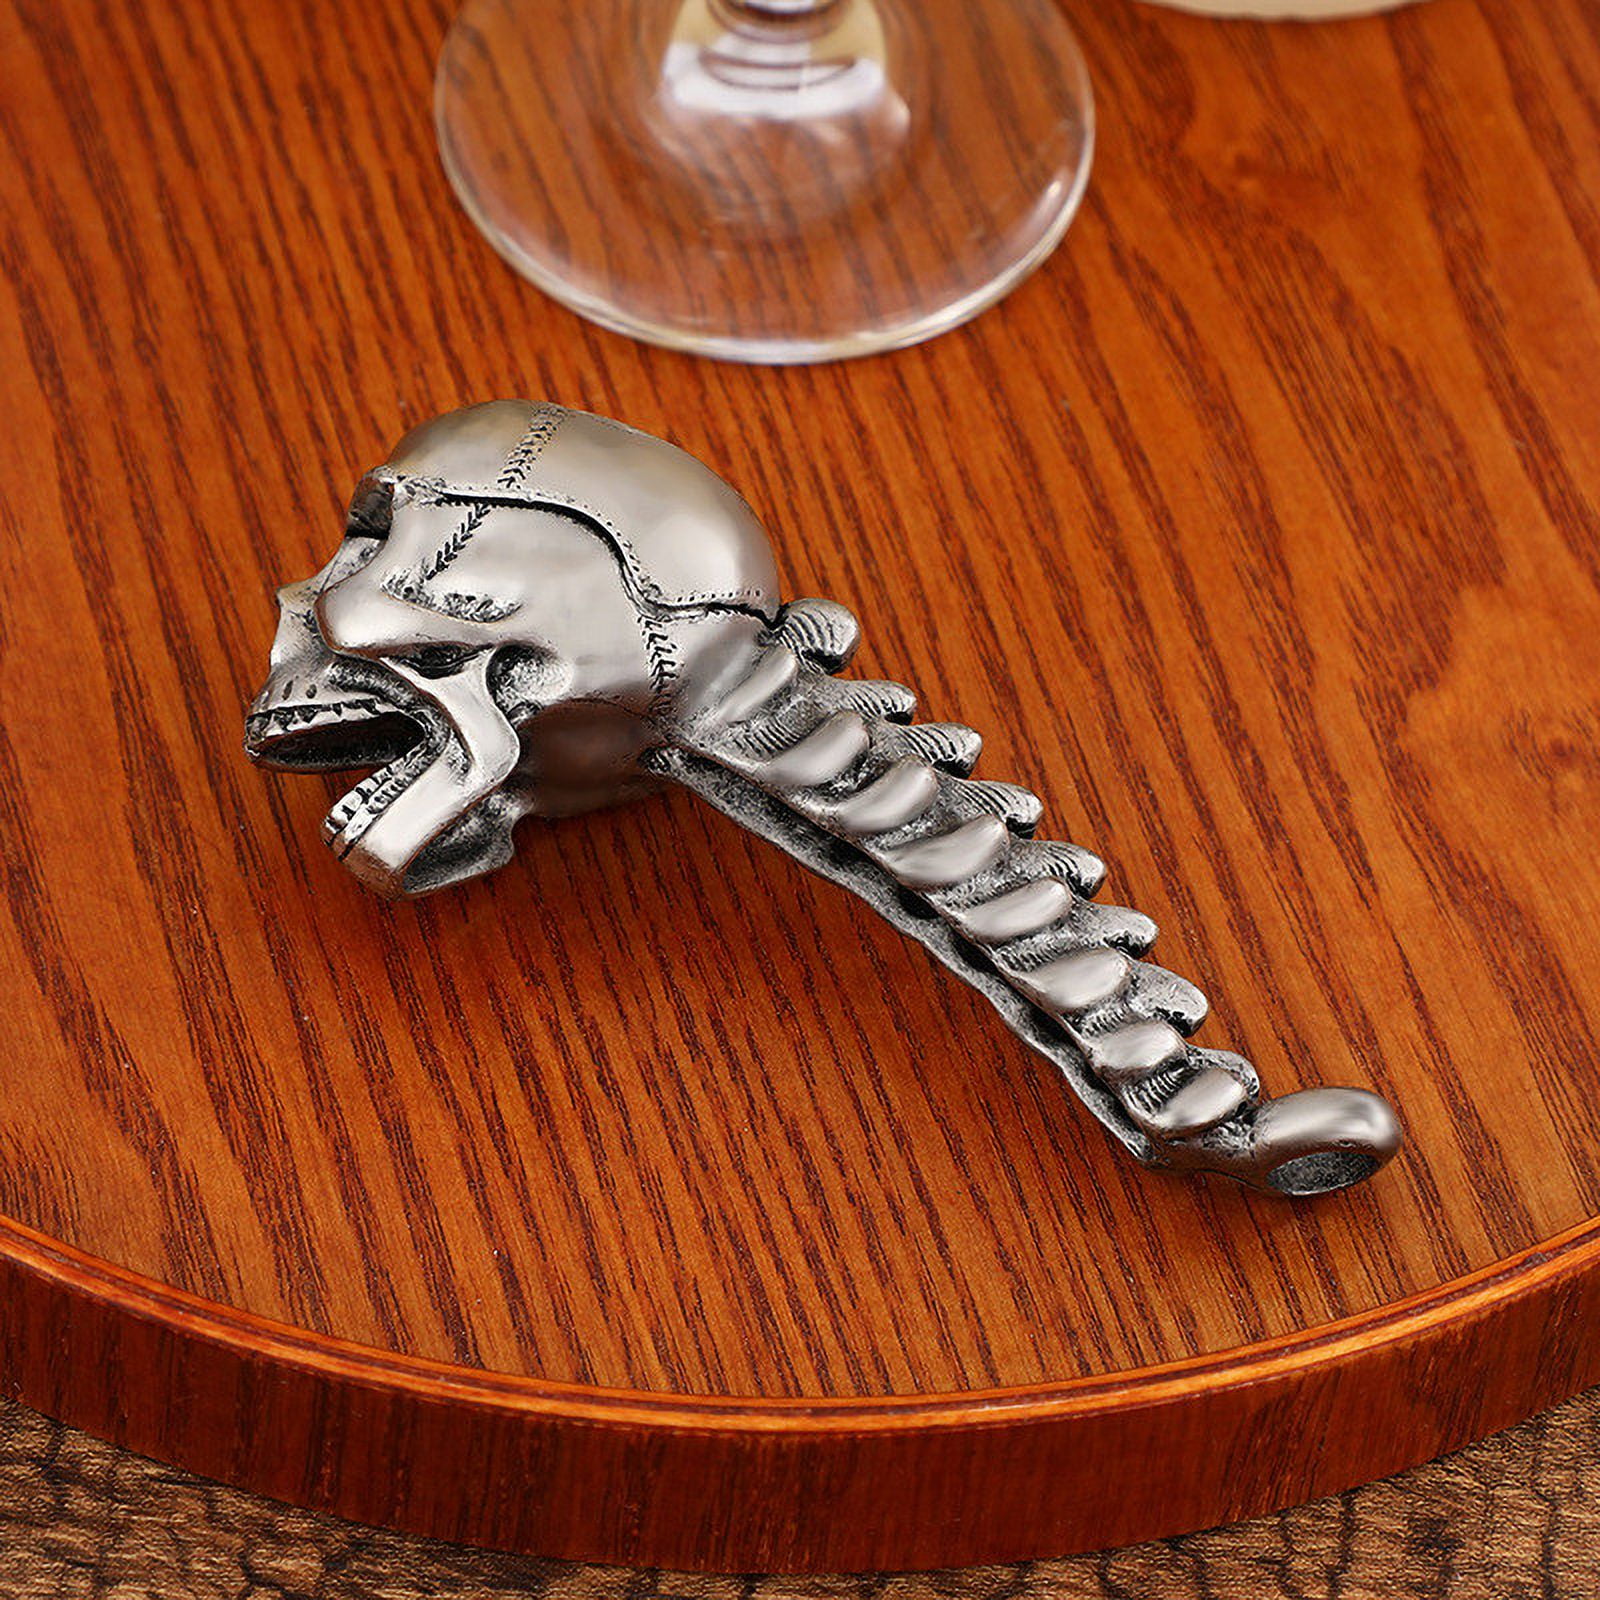  LKKCHER Skull Gifts, Skeleton Hand Beer Bottle Opener, Gothic  Gifts Birthday Halloween Gifts for Men Dad Boyfriend Husband Beer Opener  Collector with Gift Box and Card: Home & Kitchen